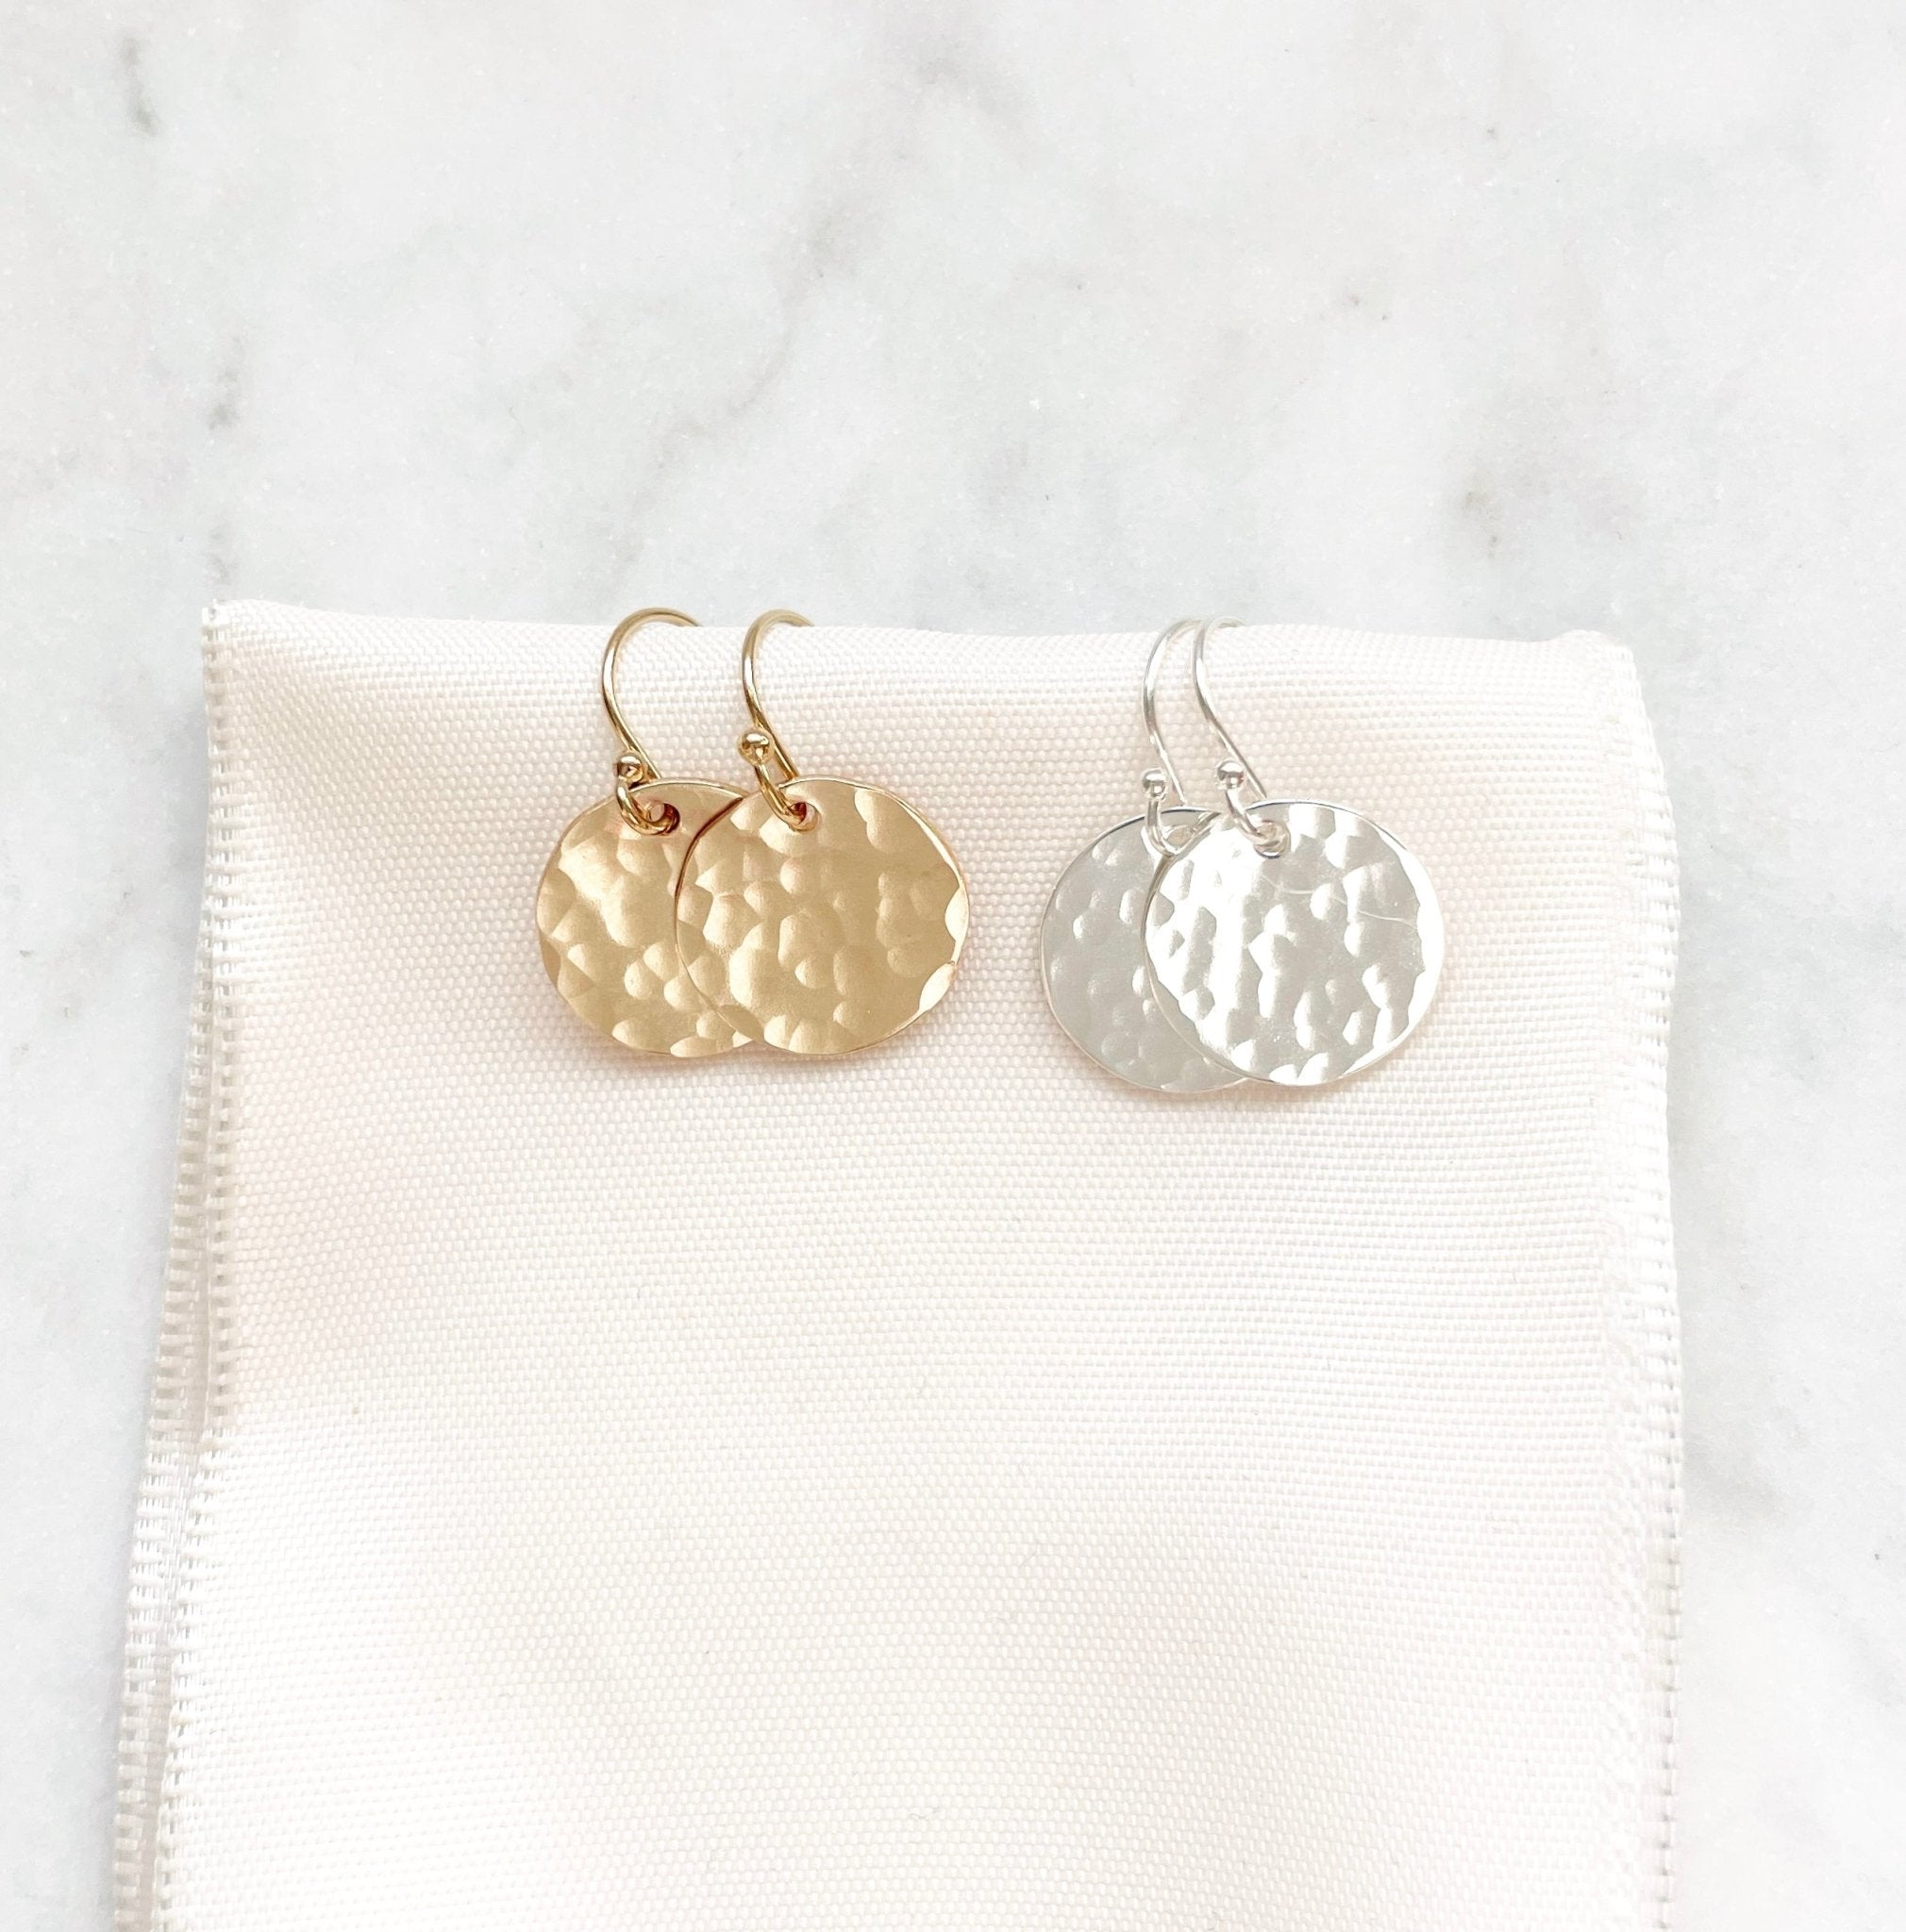 Rachel Earrings by Sarah Cornwell Jewelry. 2 pairs of shimmery, dainty gold and silver 1/2 inch textured disc earrings on a cream background.